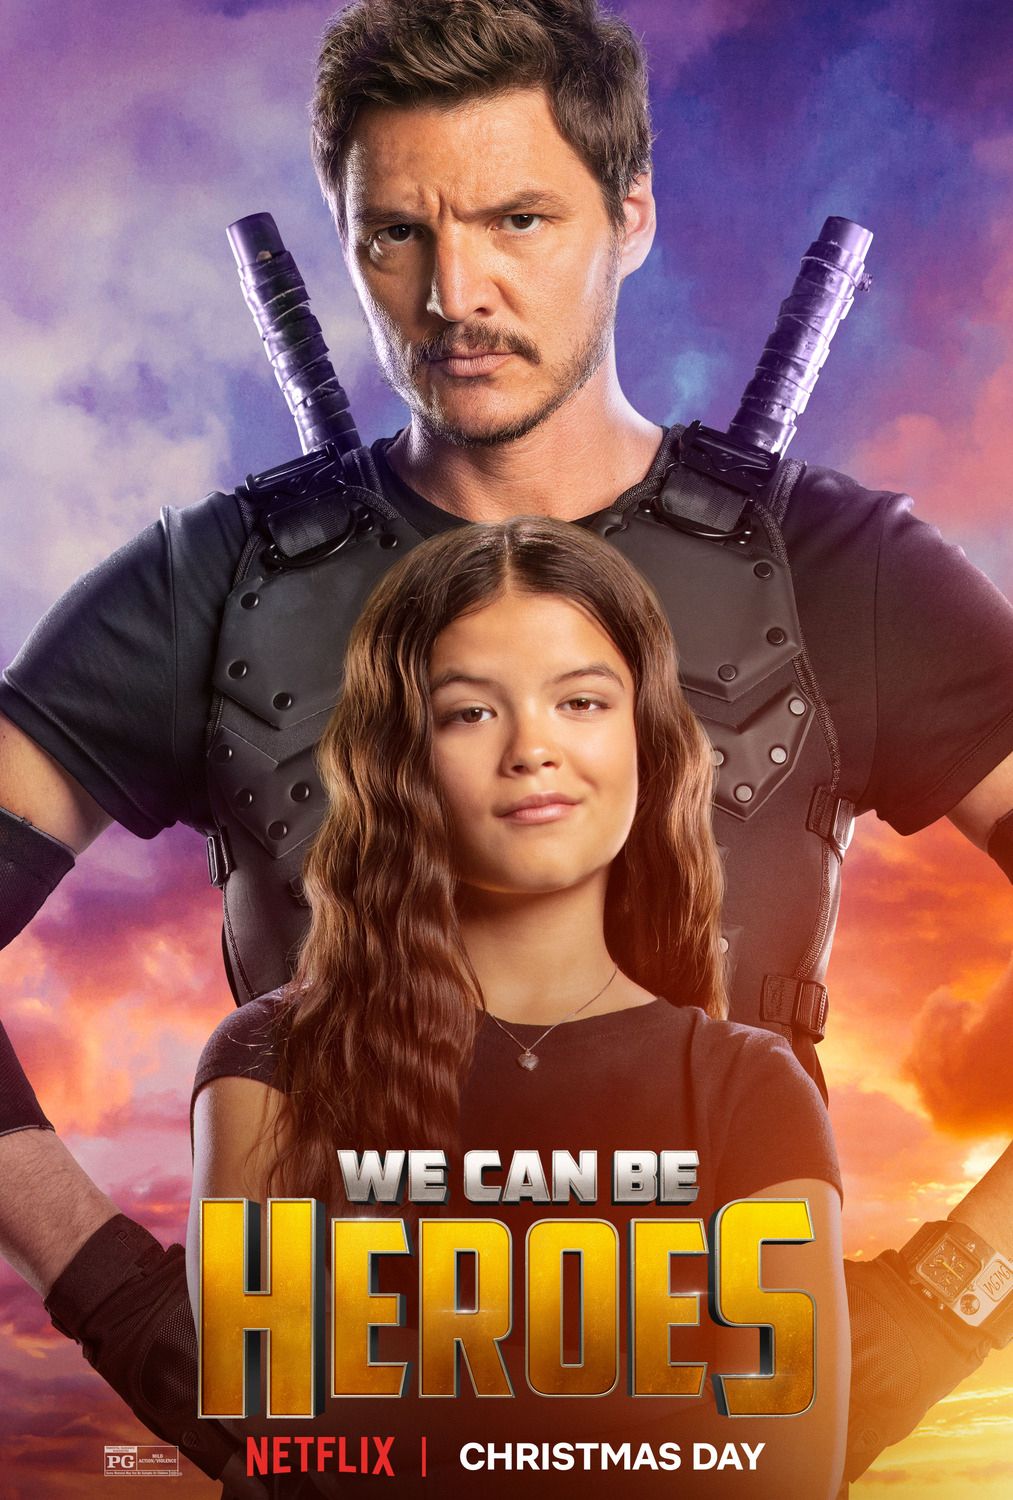 We Can Be Heroes Character Poster #1